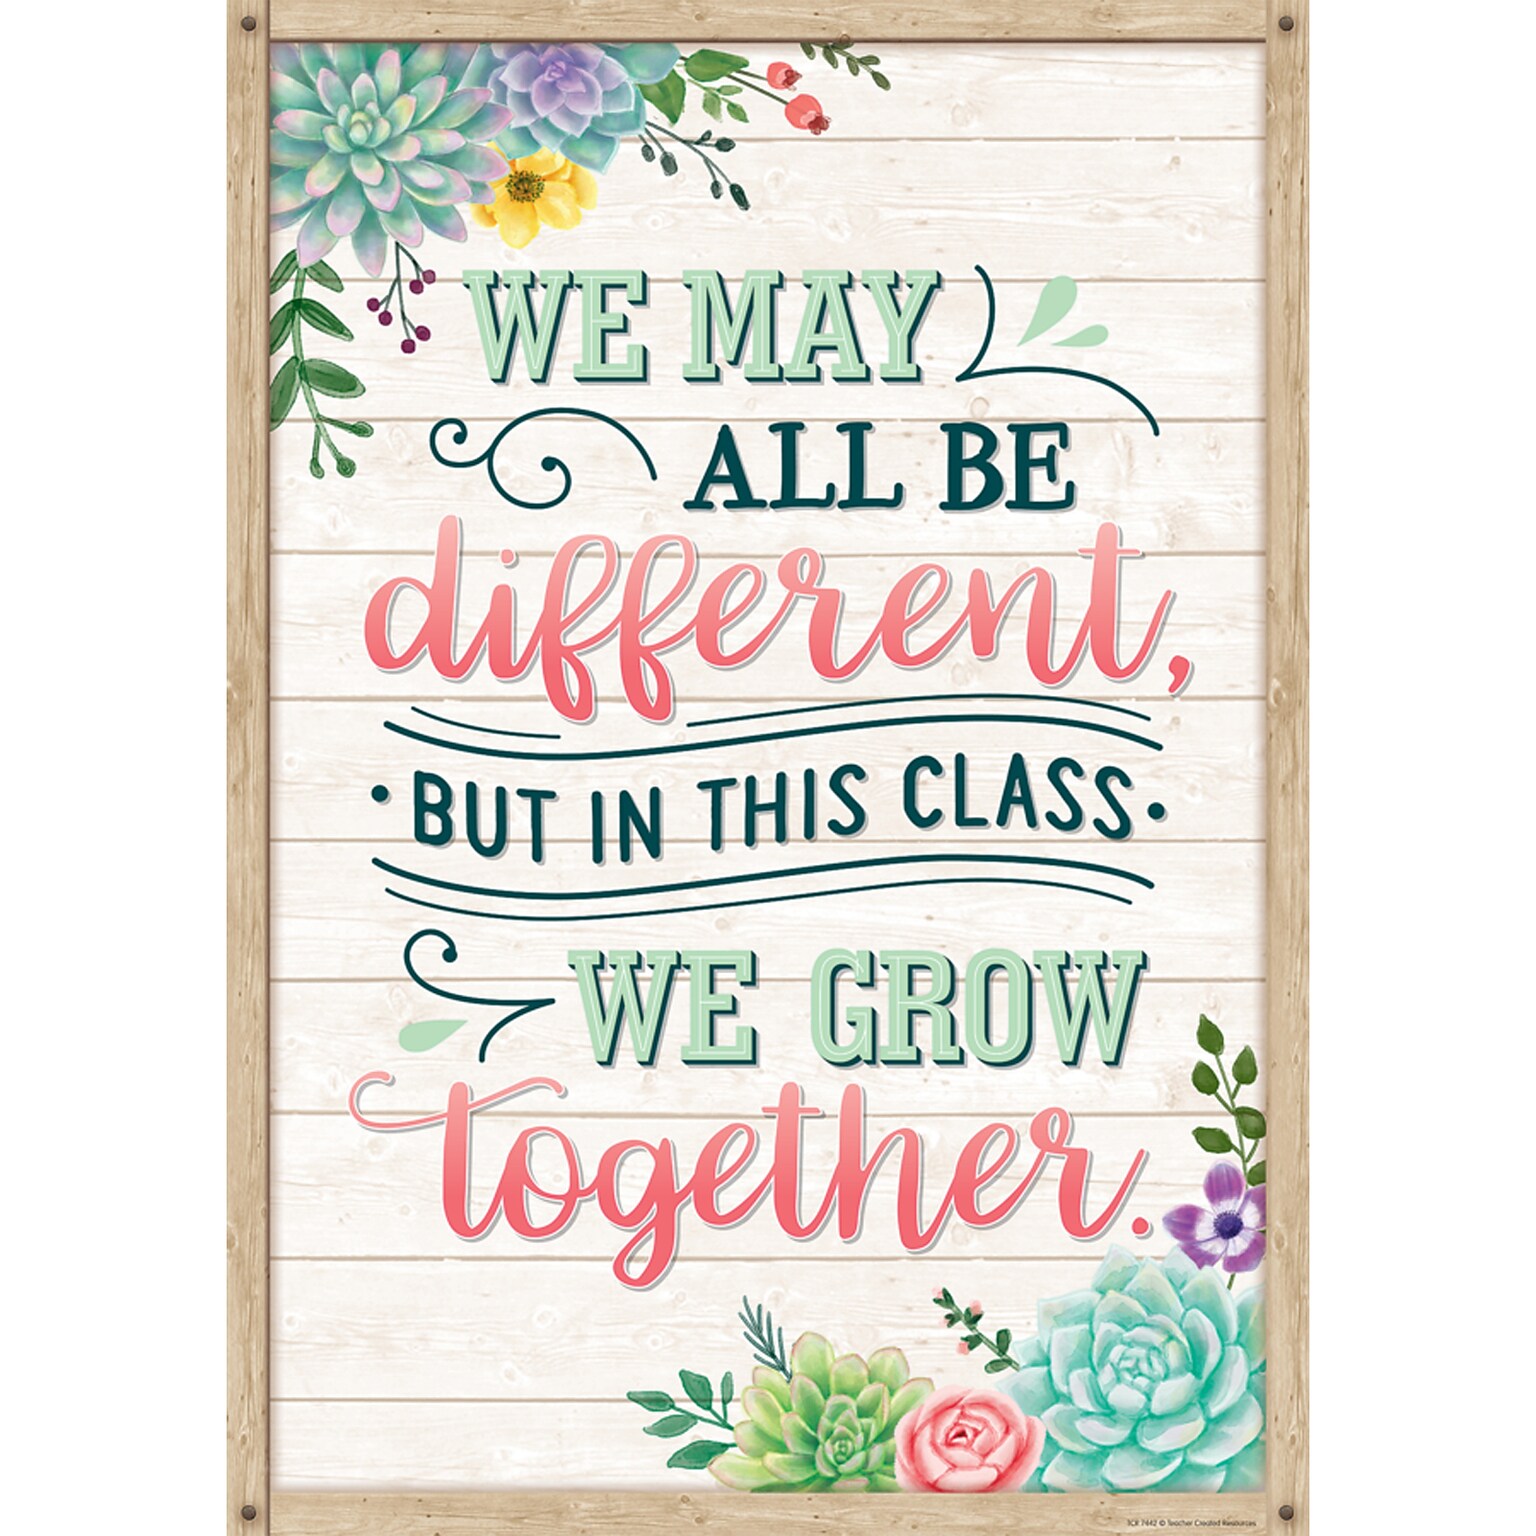 Teacher Created Resources® 13 x 19 We May All Be Different, But In This Class We Grow Together Positive Poster (TCR7442)